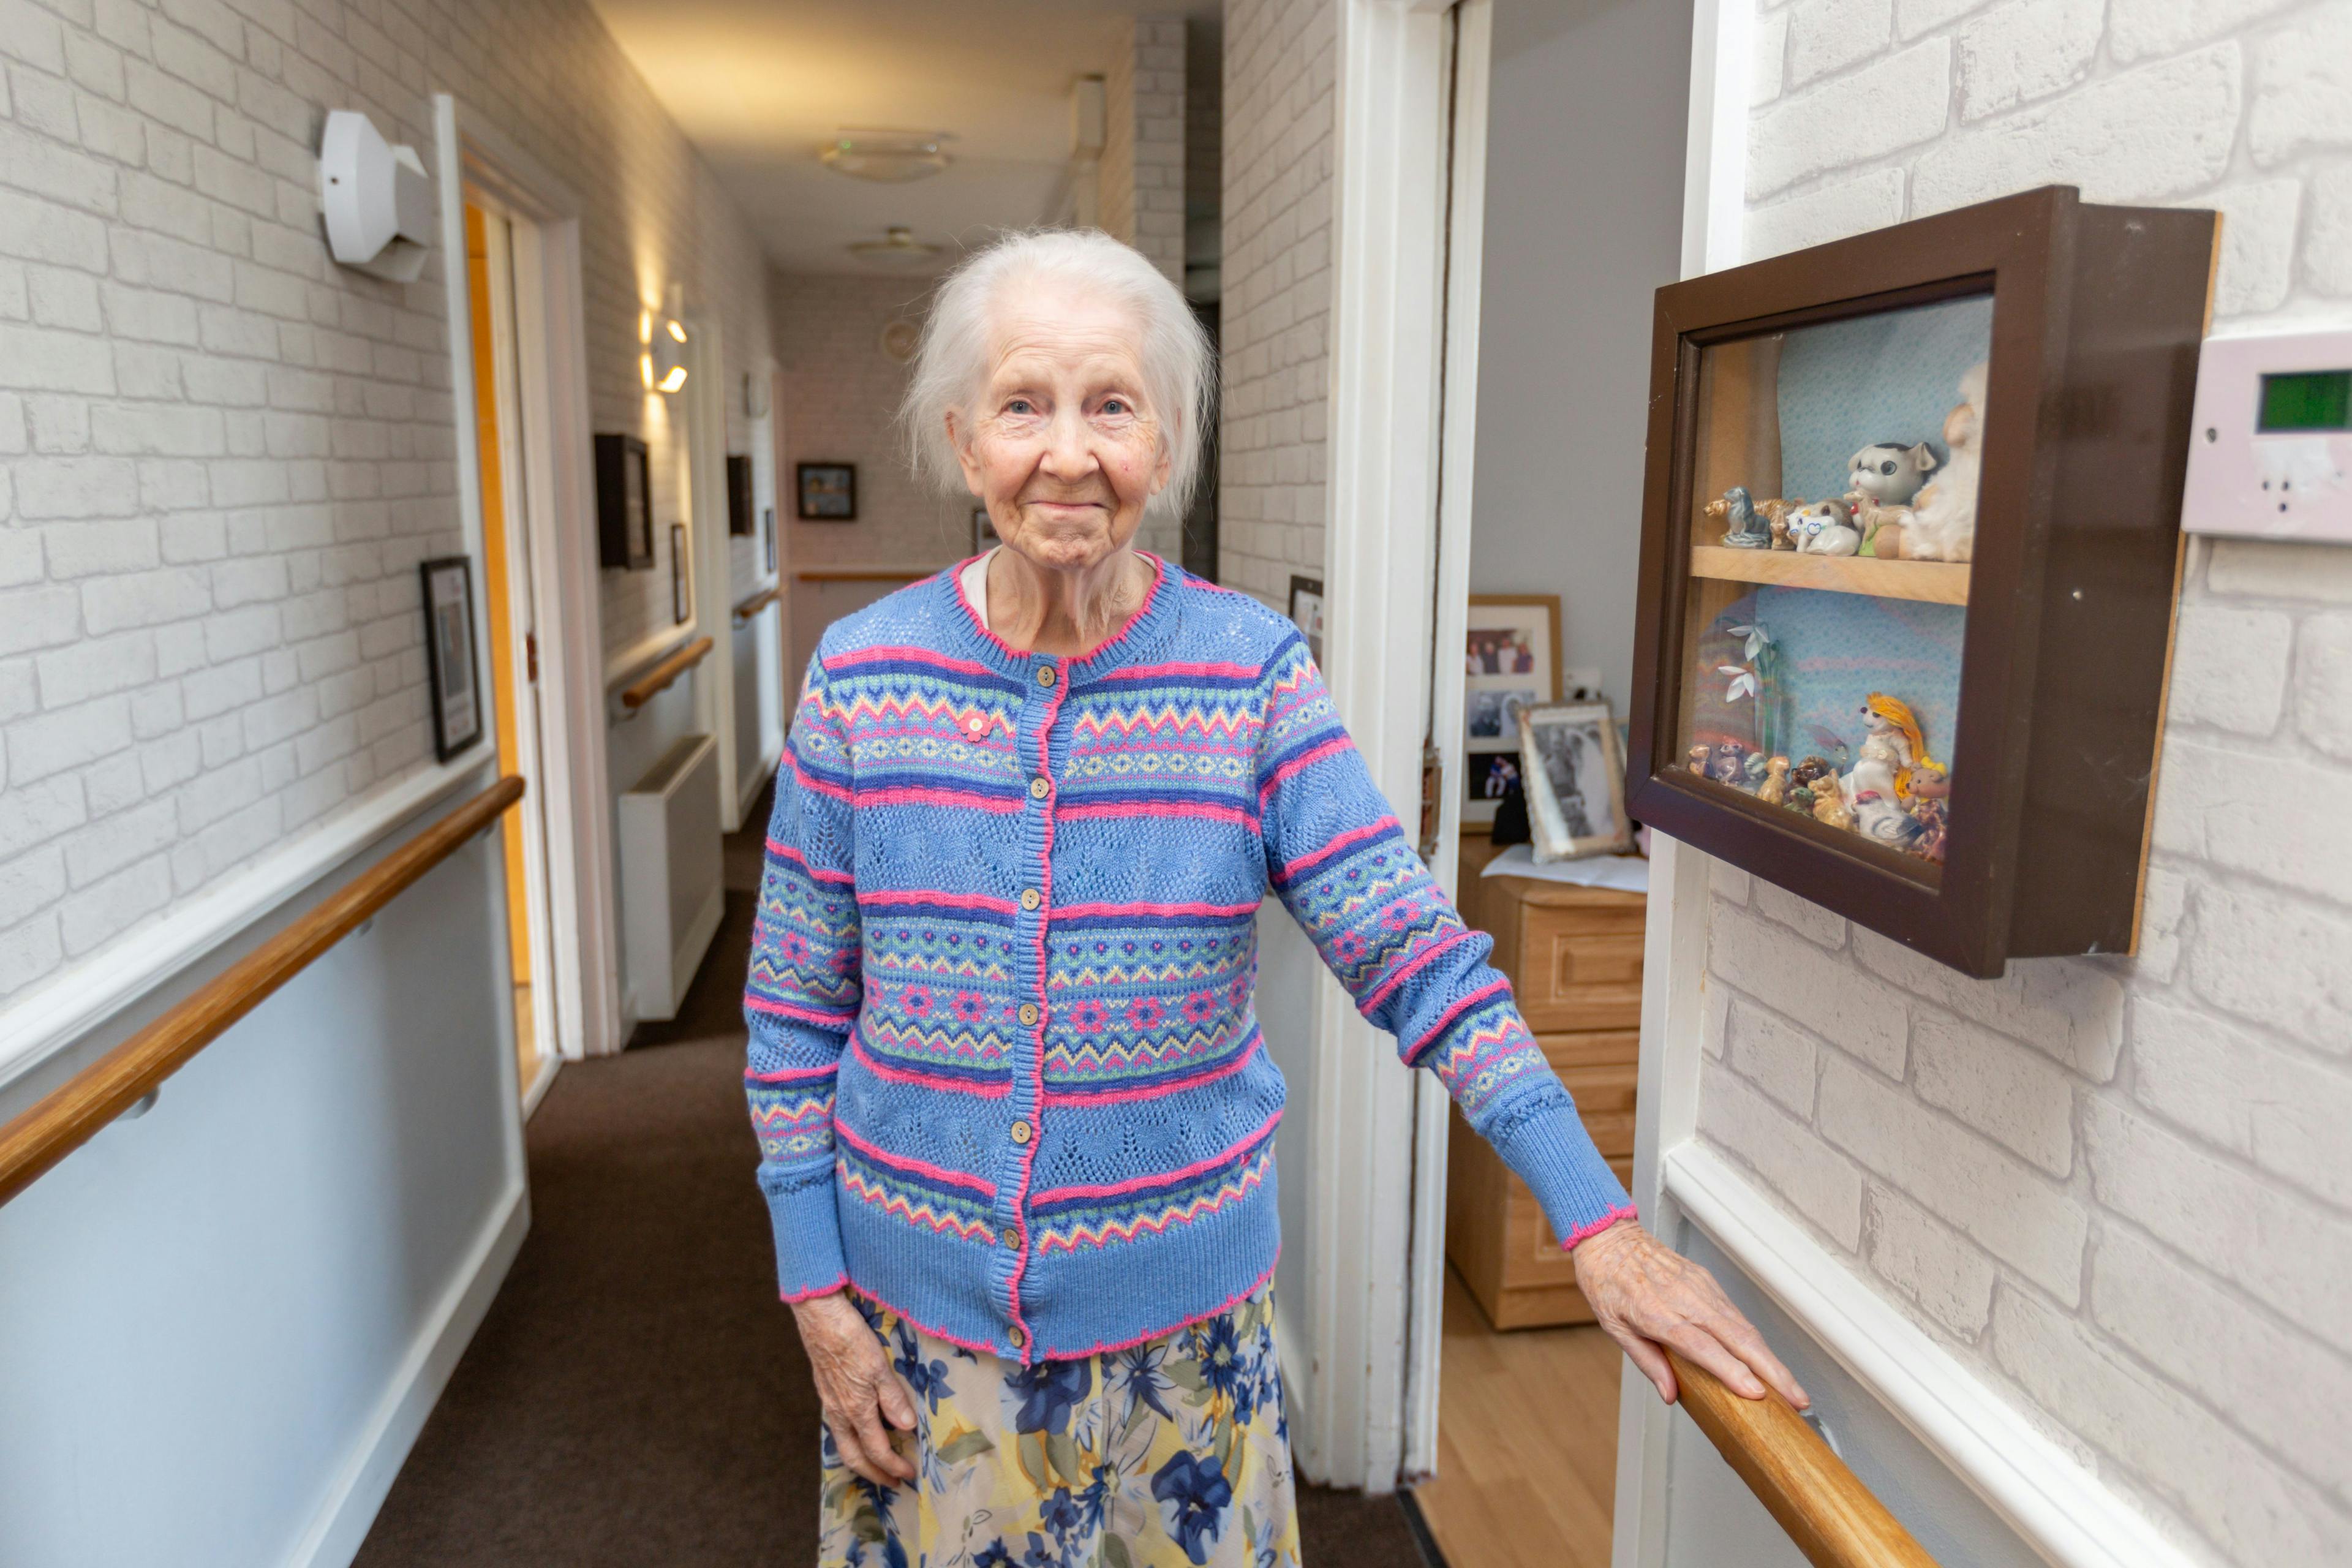 Resident at Fitzwilliam House care home in Cambridge